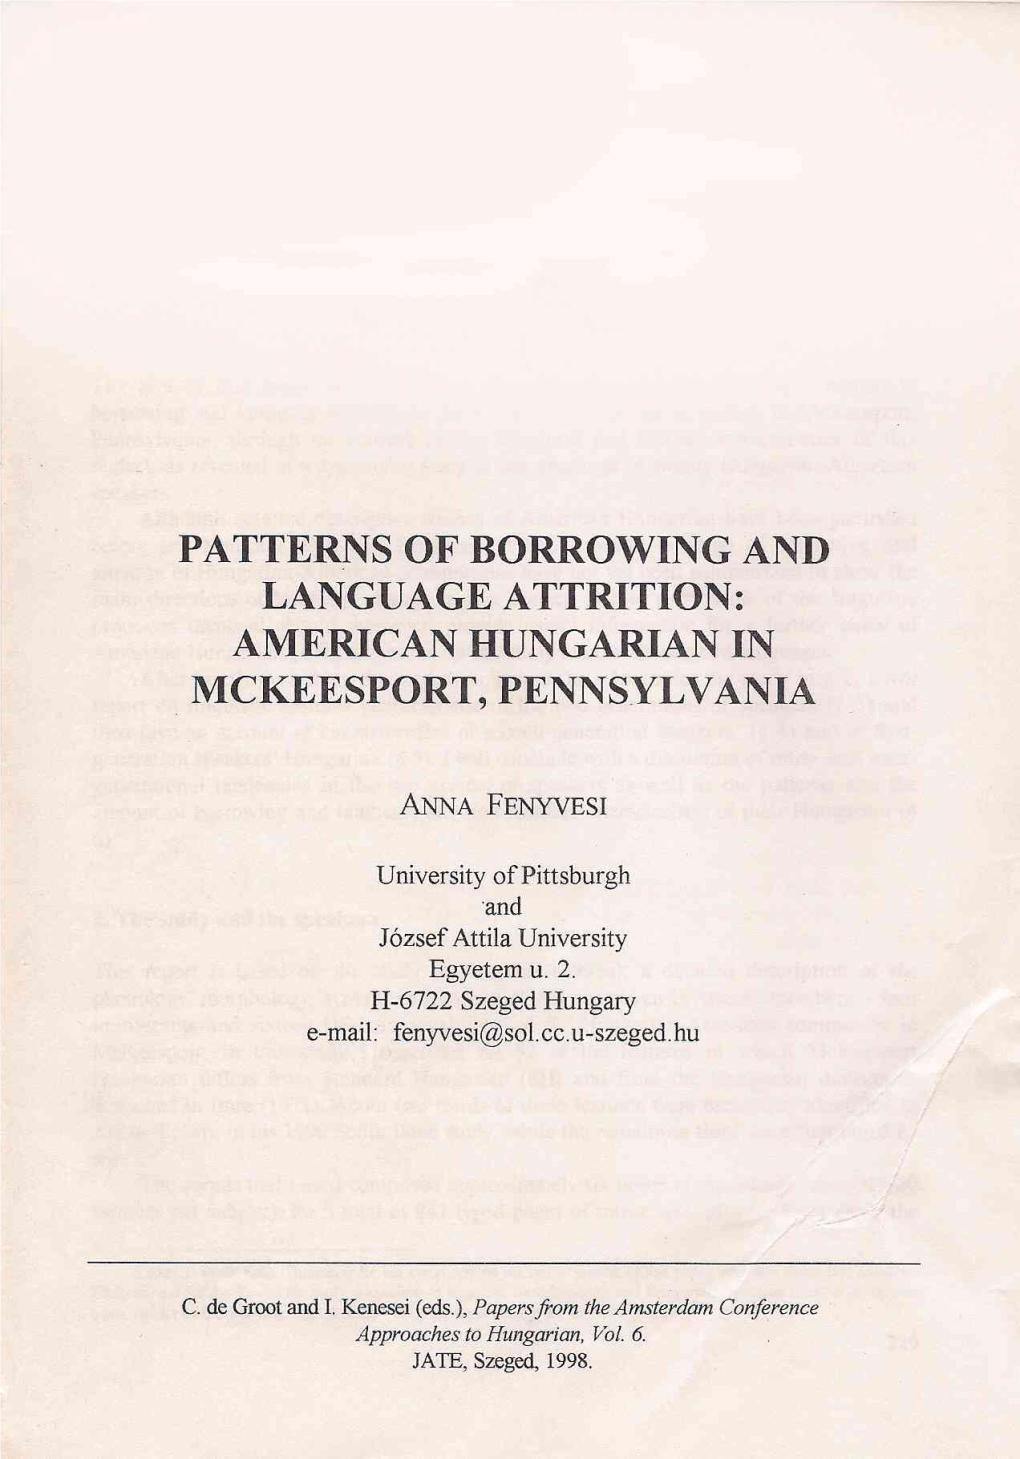 Patterns of Borrowing and Language Attrition: American Hungarian in Mckeesport, Pennsylvania